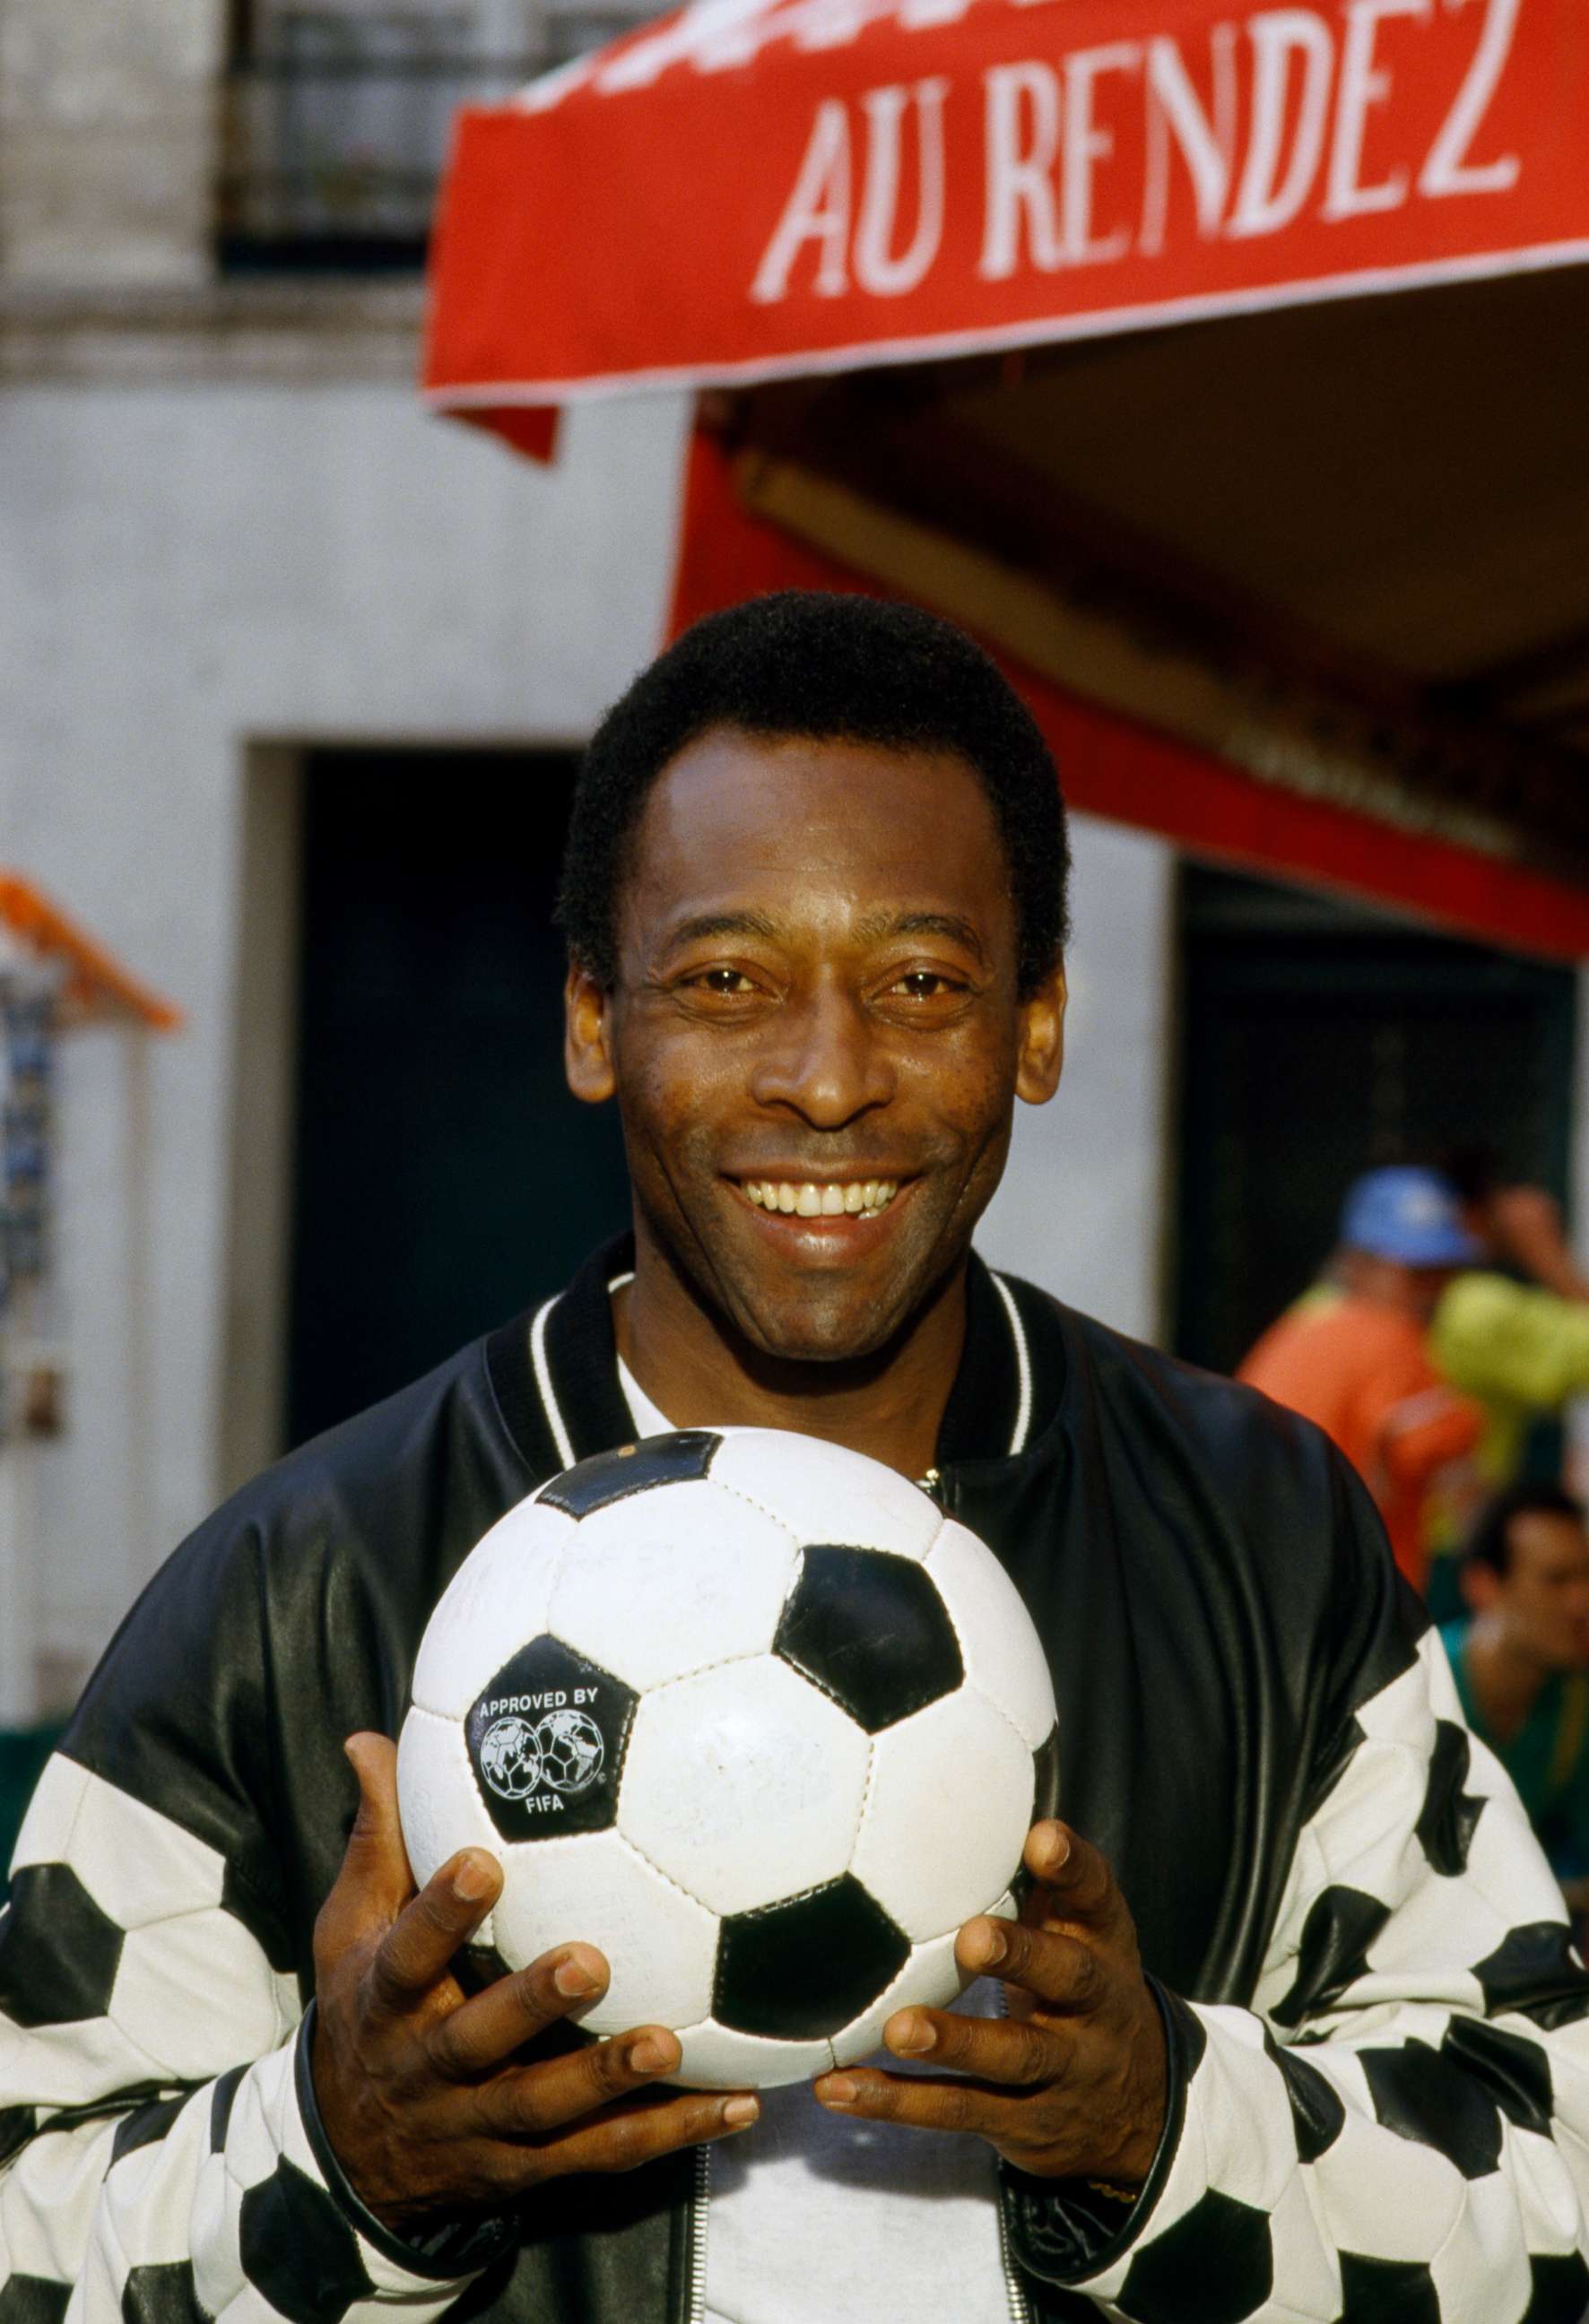 PHOTO: In this Aug. 6, 1987 file photo, Brazilian soccer champion Pele is shown.